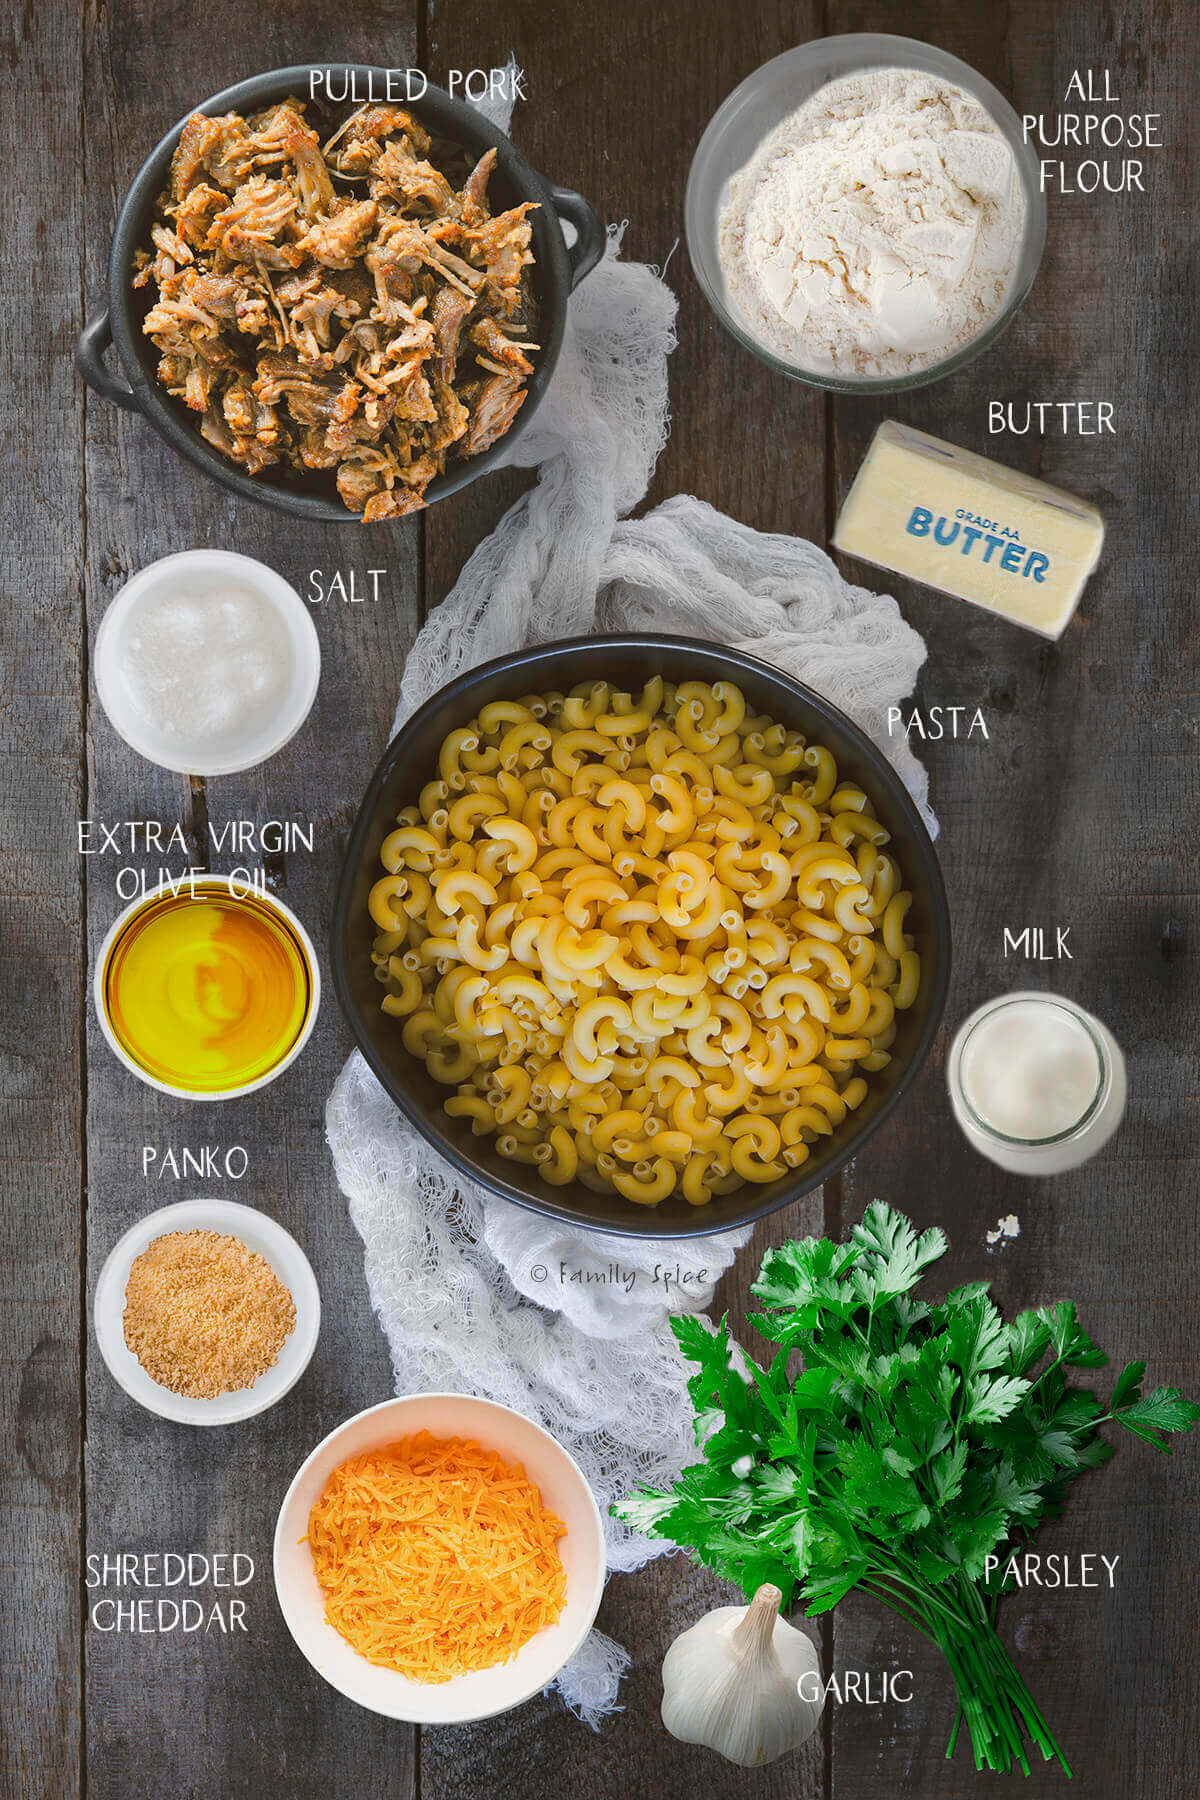 Ingredients labeled and needed to make pulled pork mac and cheese